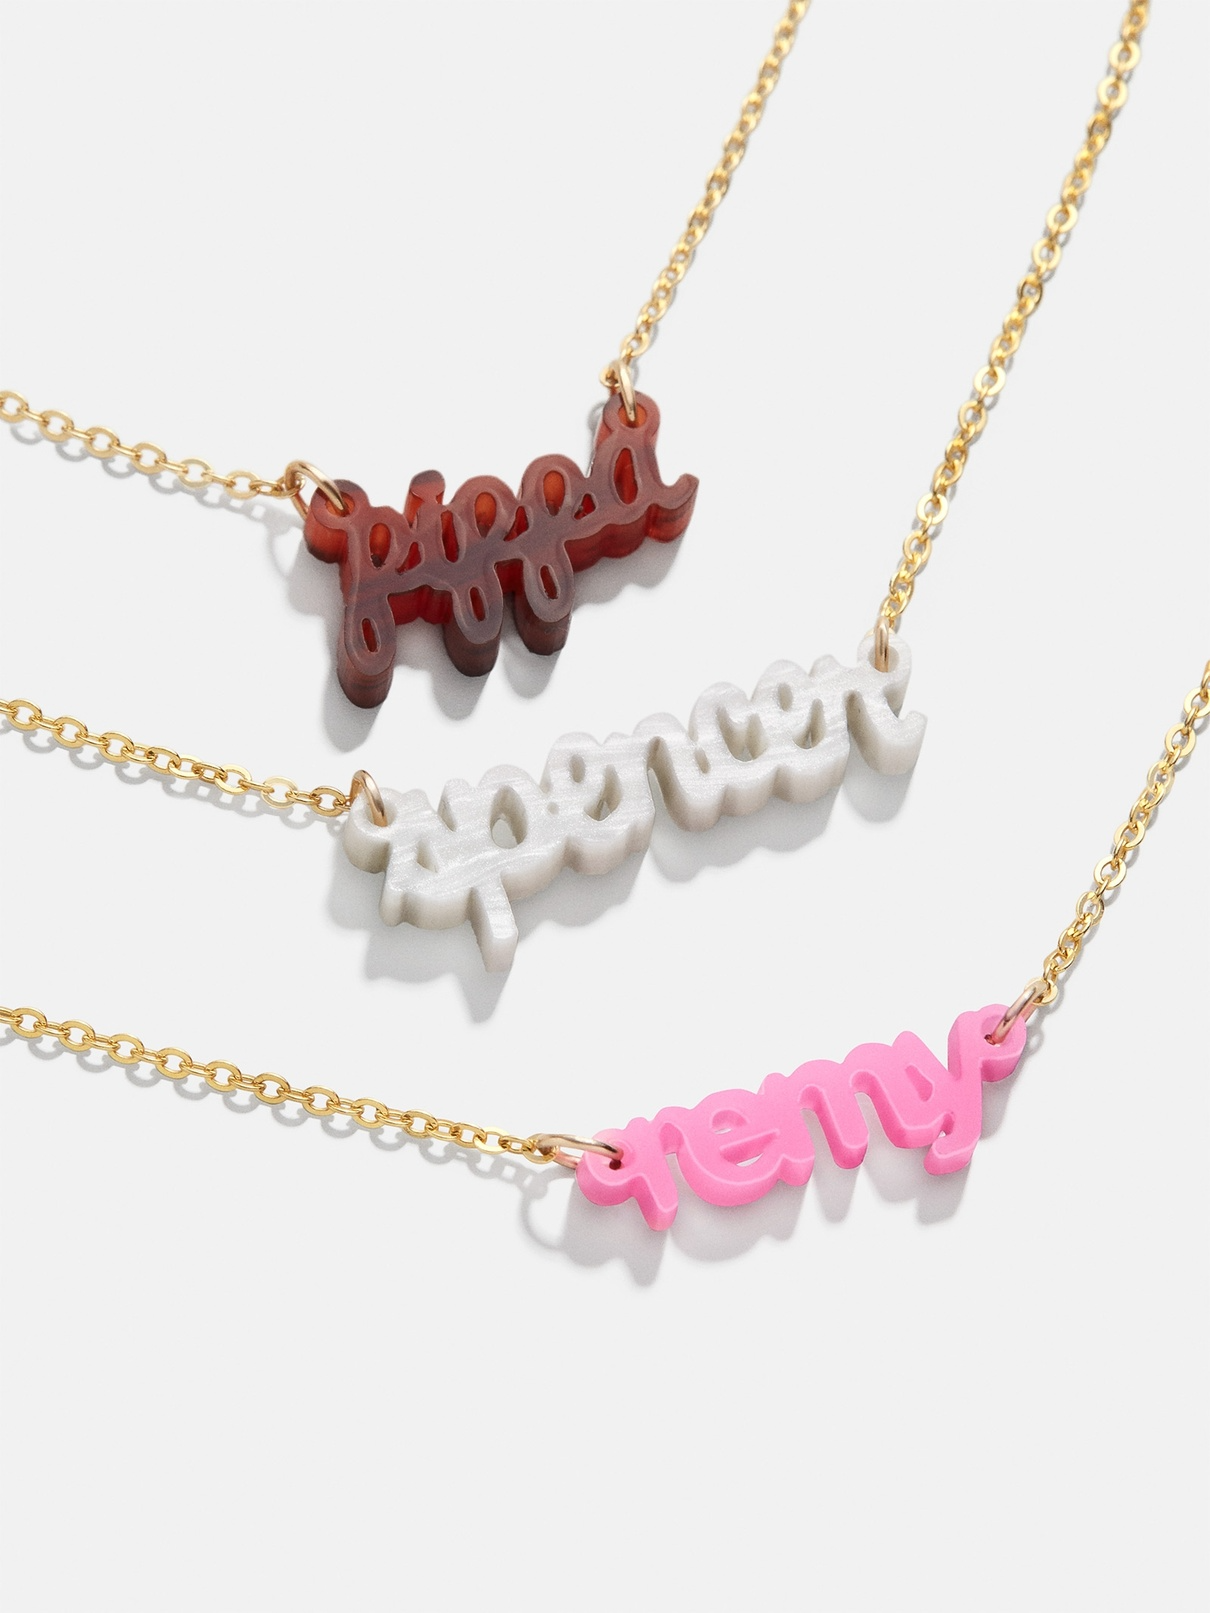 Personalized Minimalist Necklace Custom Dainty Necklace Name Necklace Letter Name Jewelry Gold Kids Necklace for Charlie